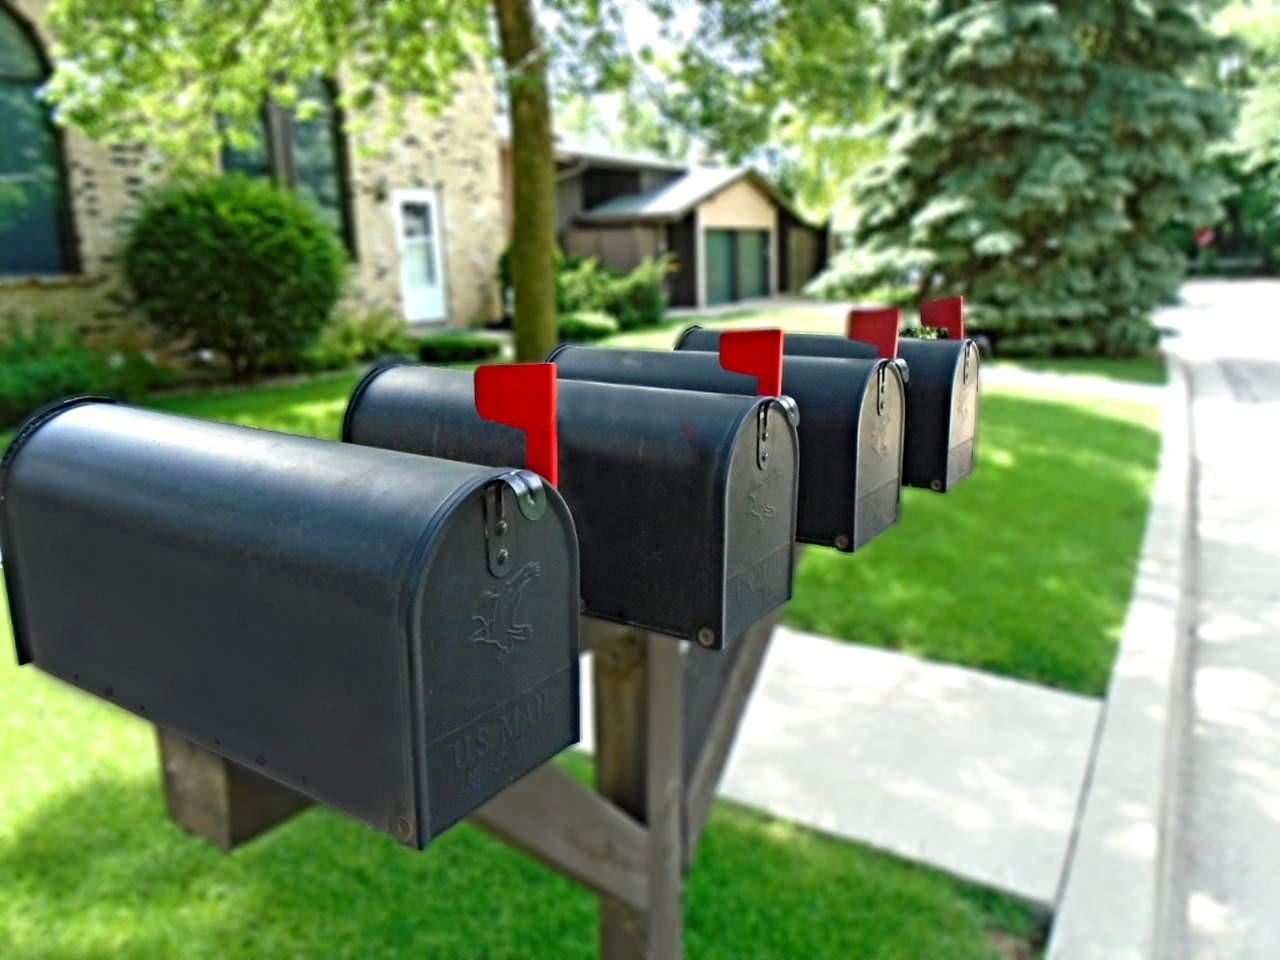 mailboxes in the suburbs